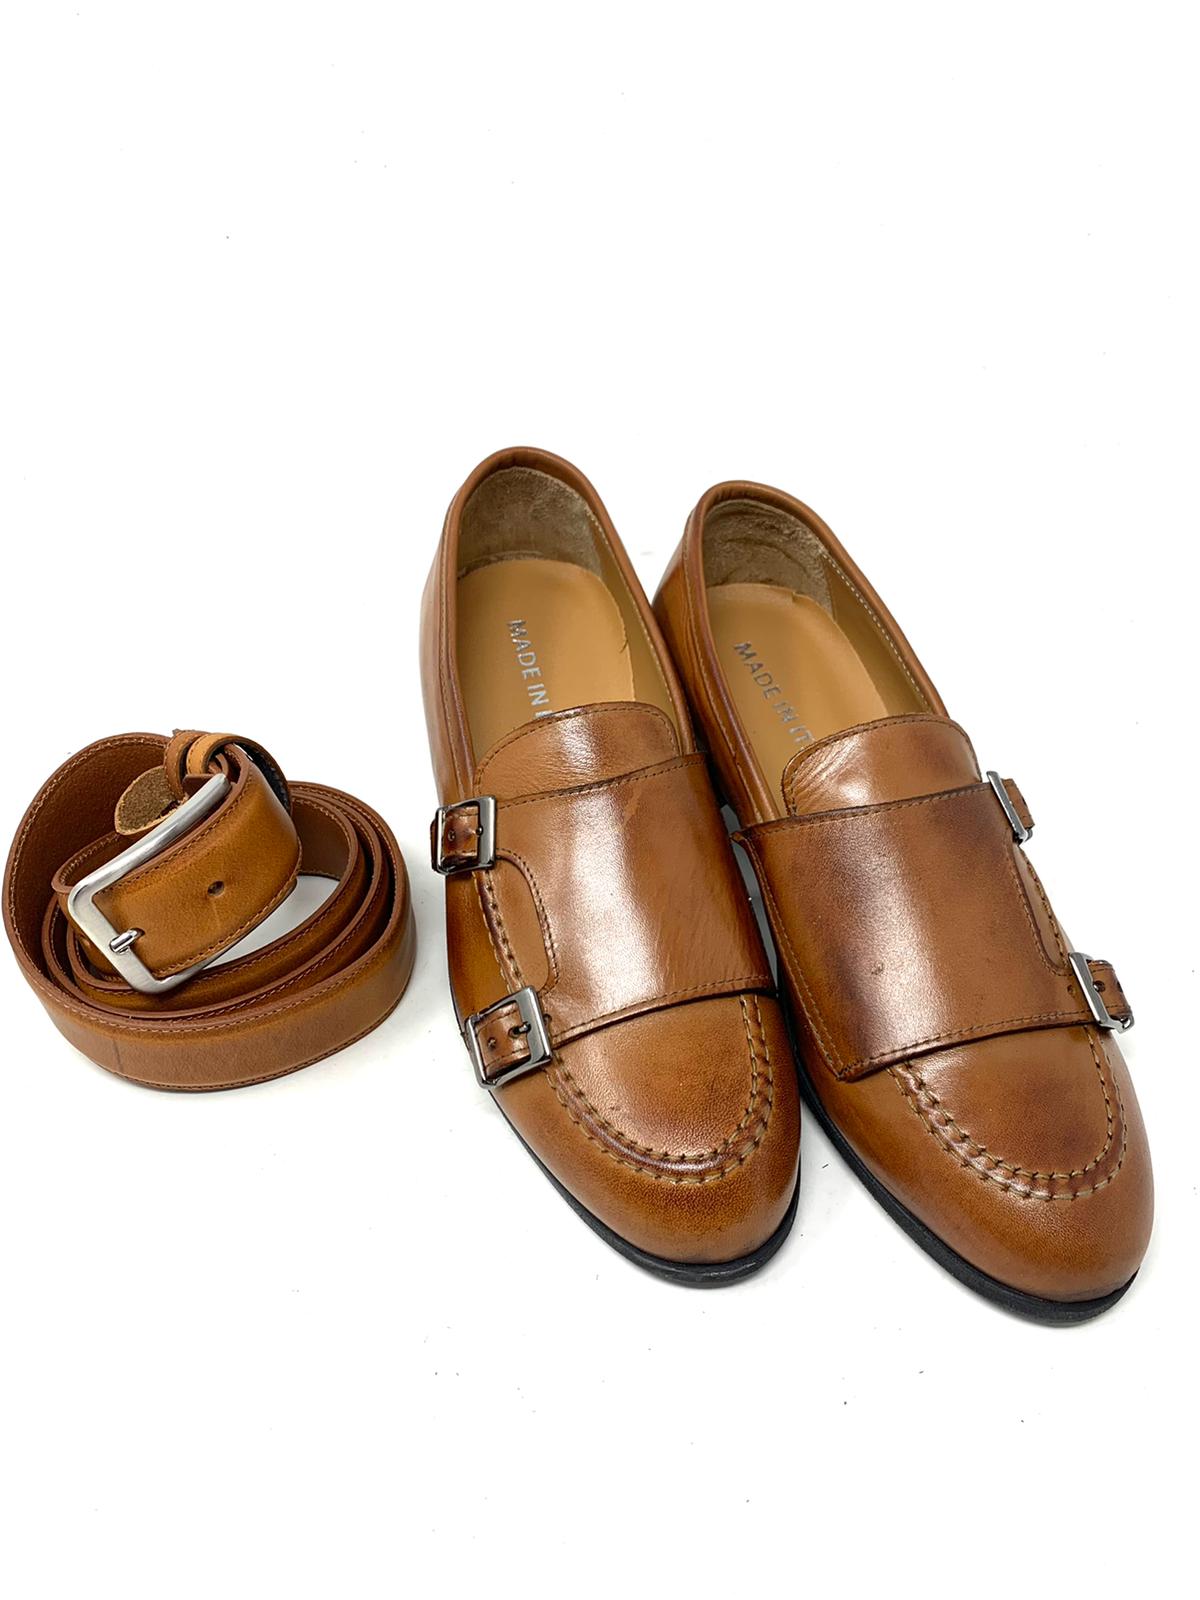 Double buckle moccasin with rubber sole